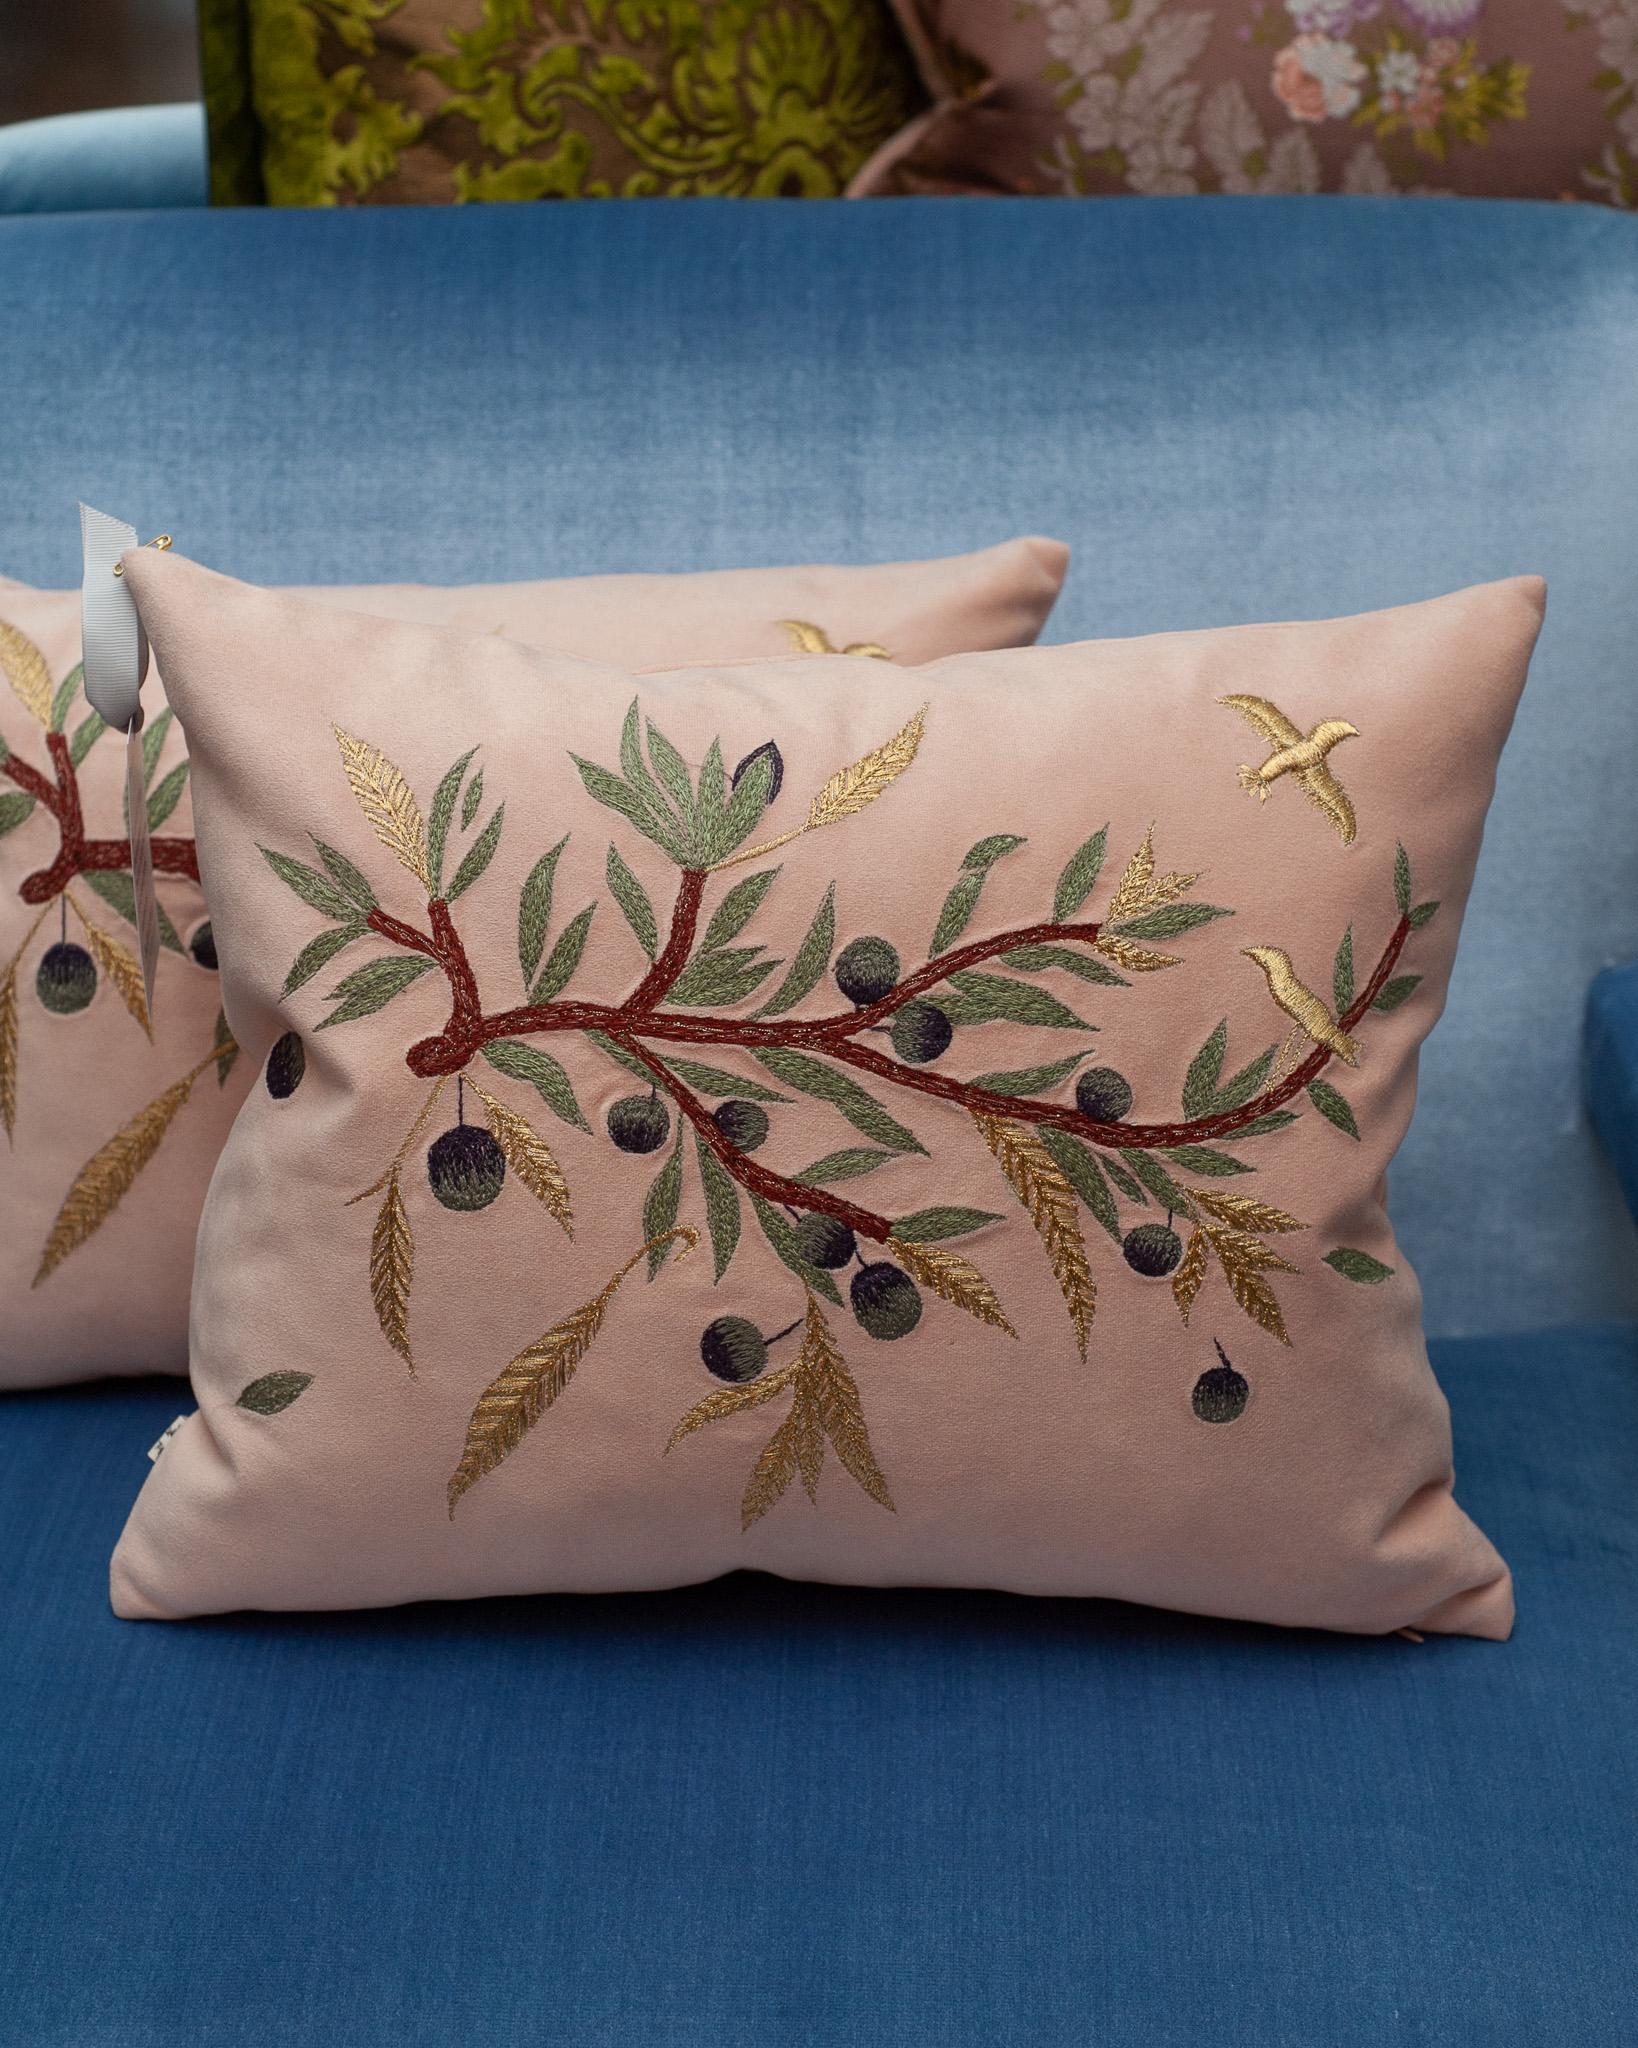 A beautiful embroidered pillow with dove and olive branch motif, ornately embroidered in a combination of coloured and metallic thread on an ultrasuede backing. Casual yet elegant, a new pair of pillows can transform a space with a modest